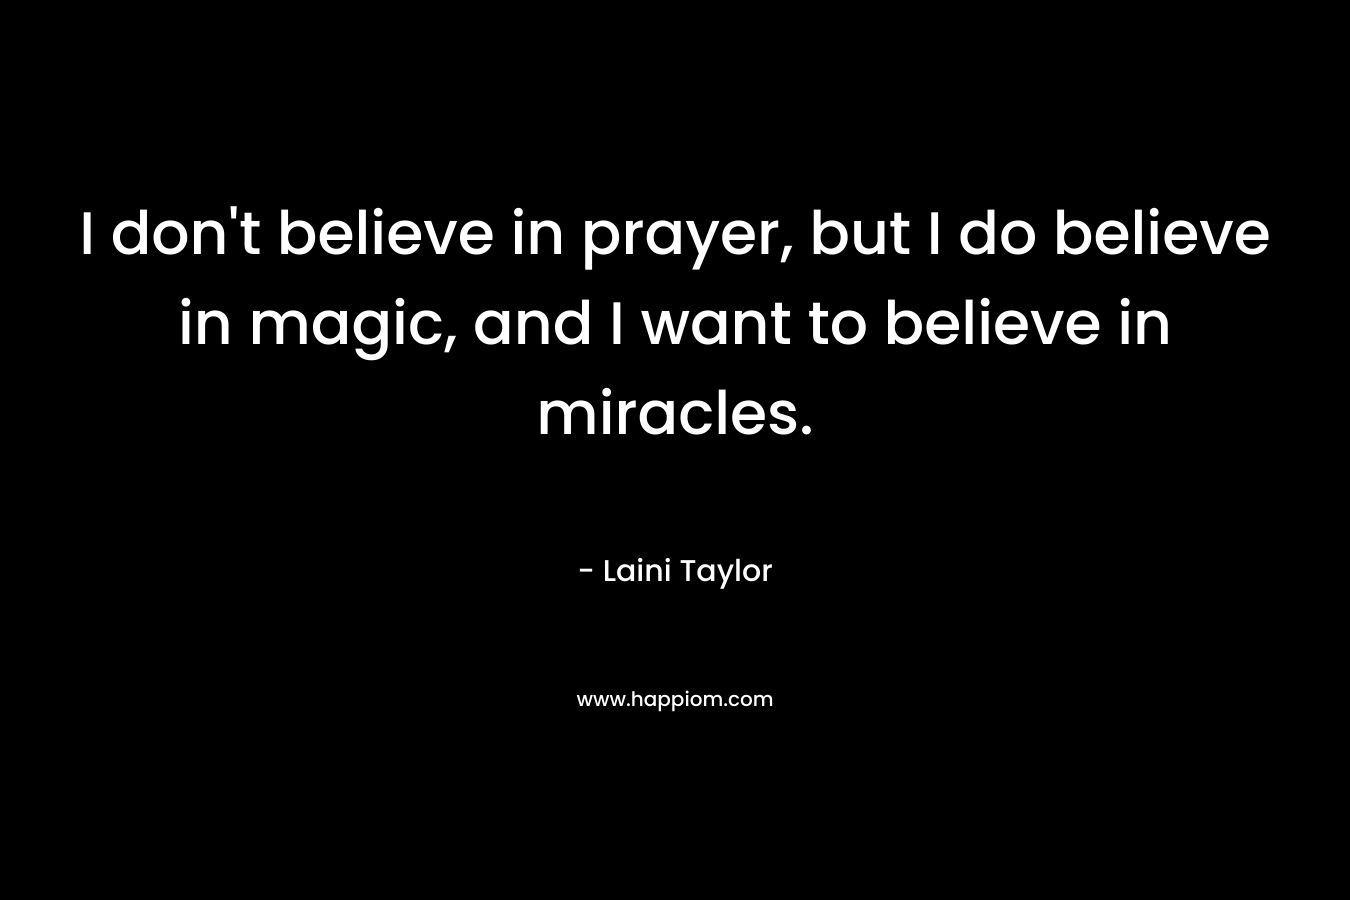 I don't believe in prayer, but I do believe in magic, and I want to believe in miracles.